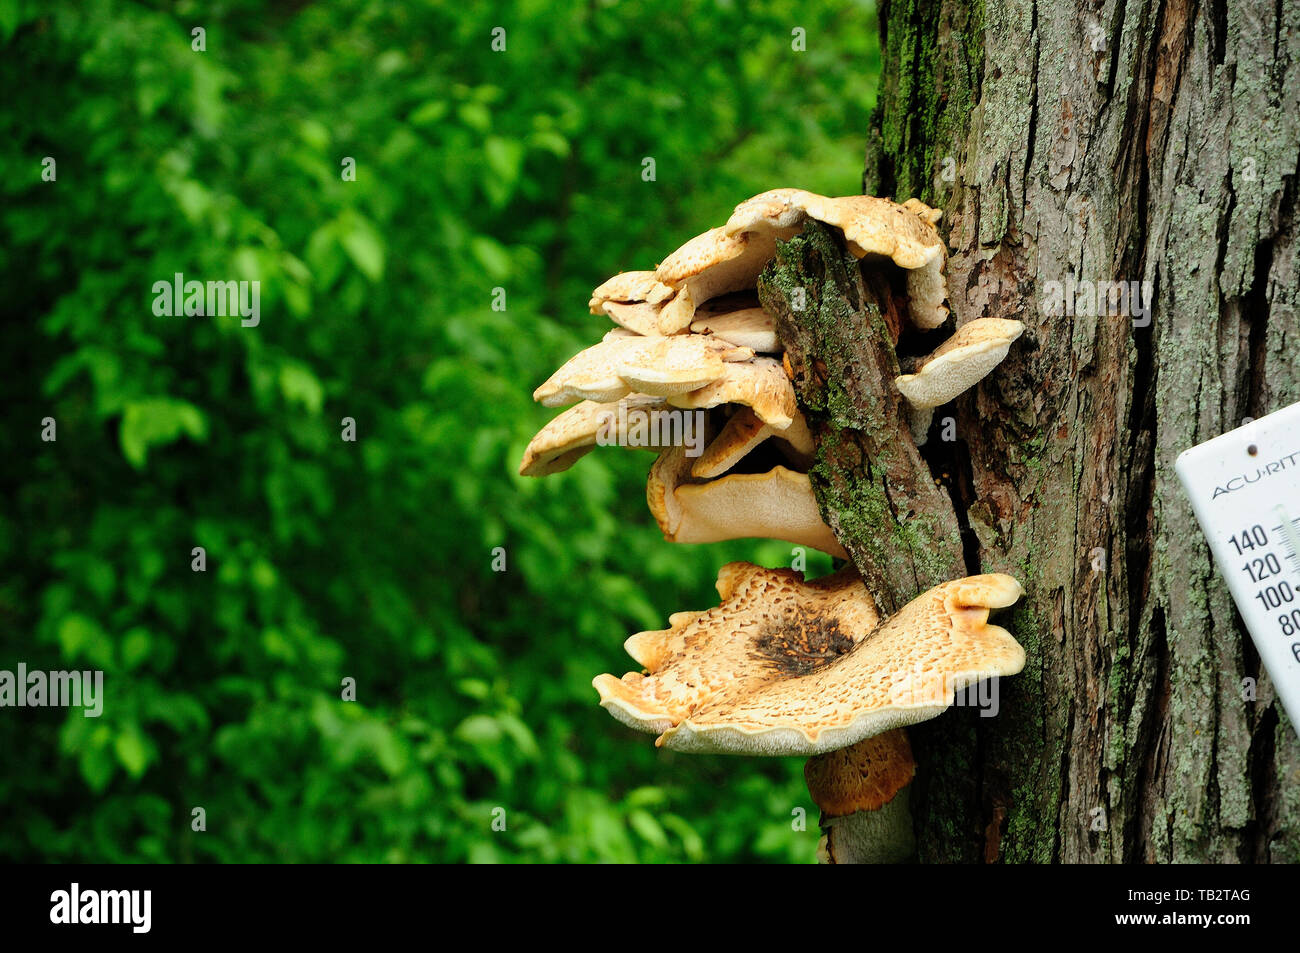 Unknown species of Mushroom growing out of tree trunk bark. A rather large example at height of approx 1.5 feet. Stock Photo